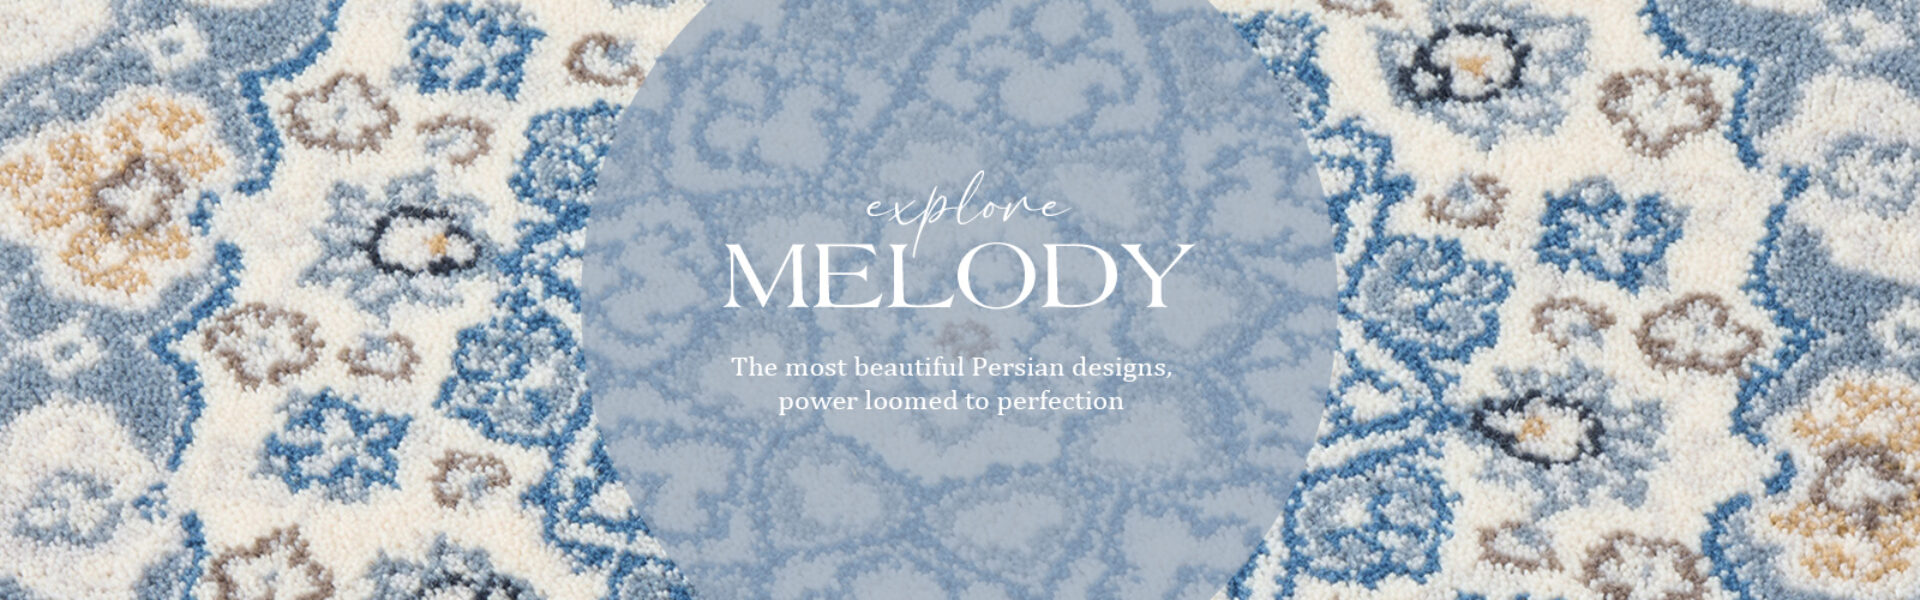 melody-2024-cover